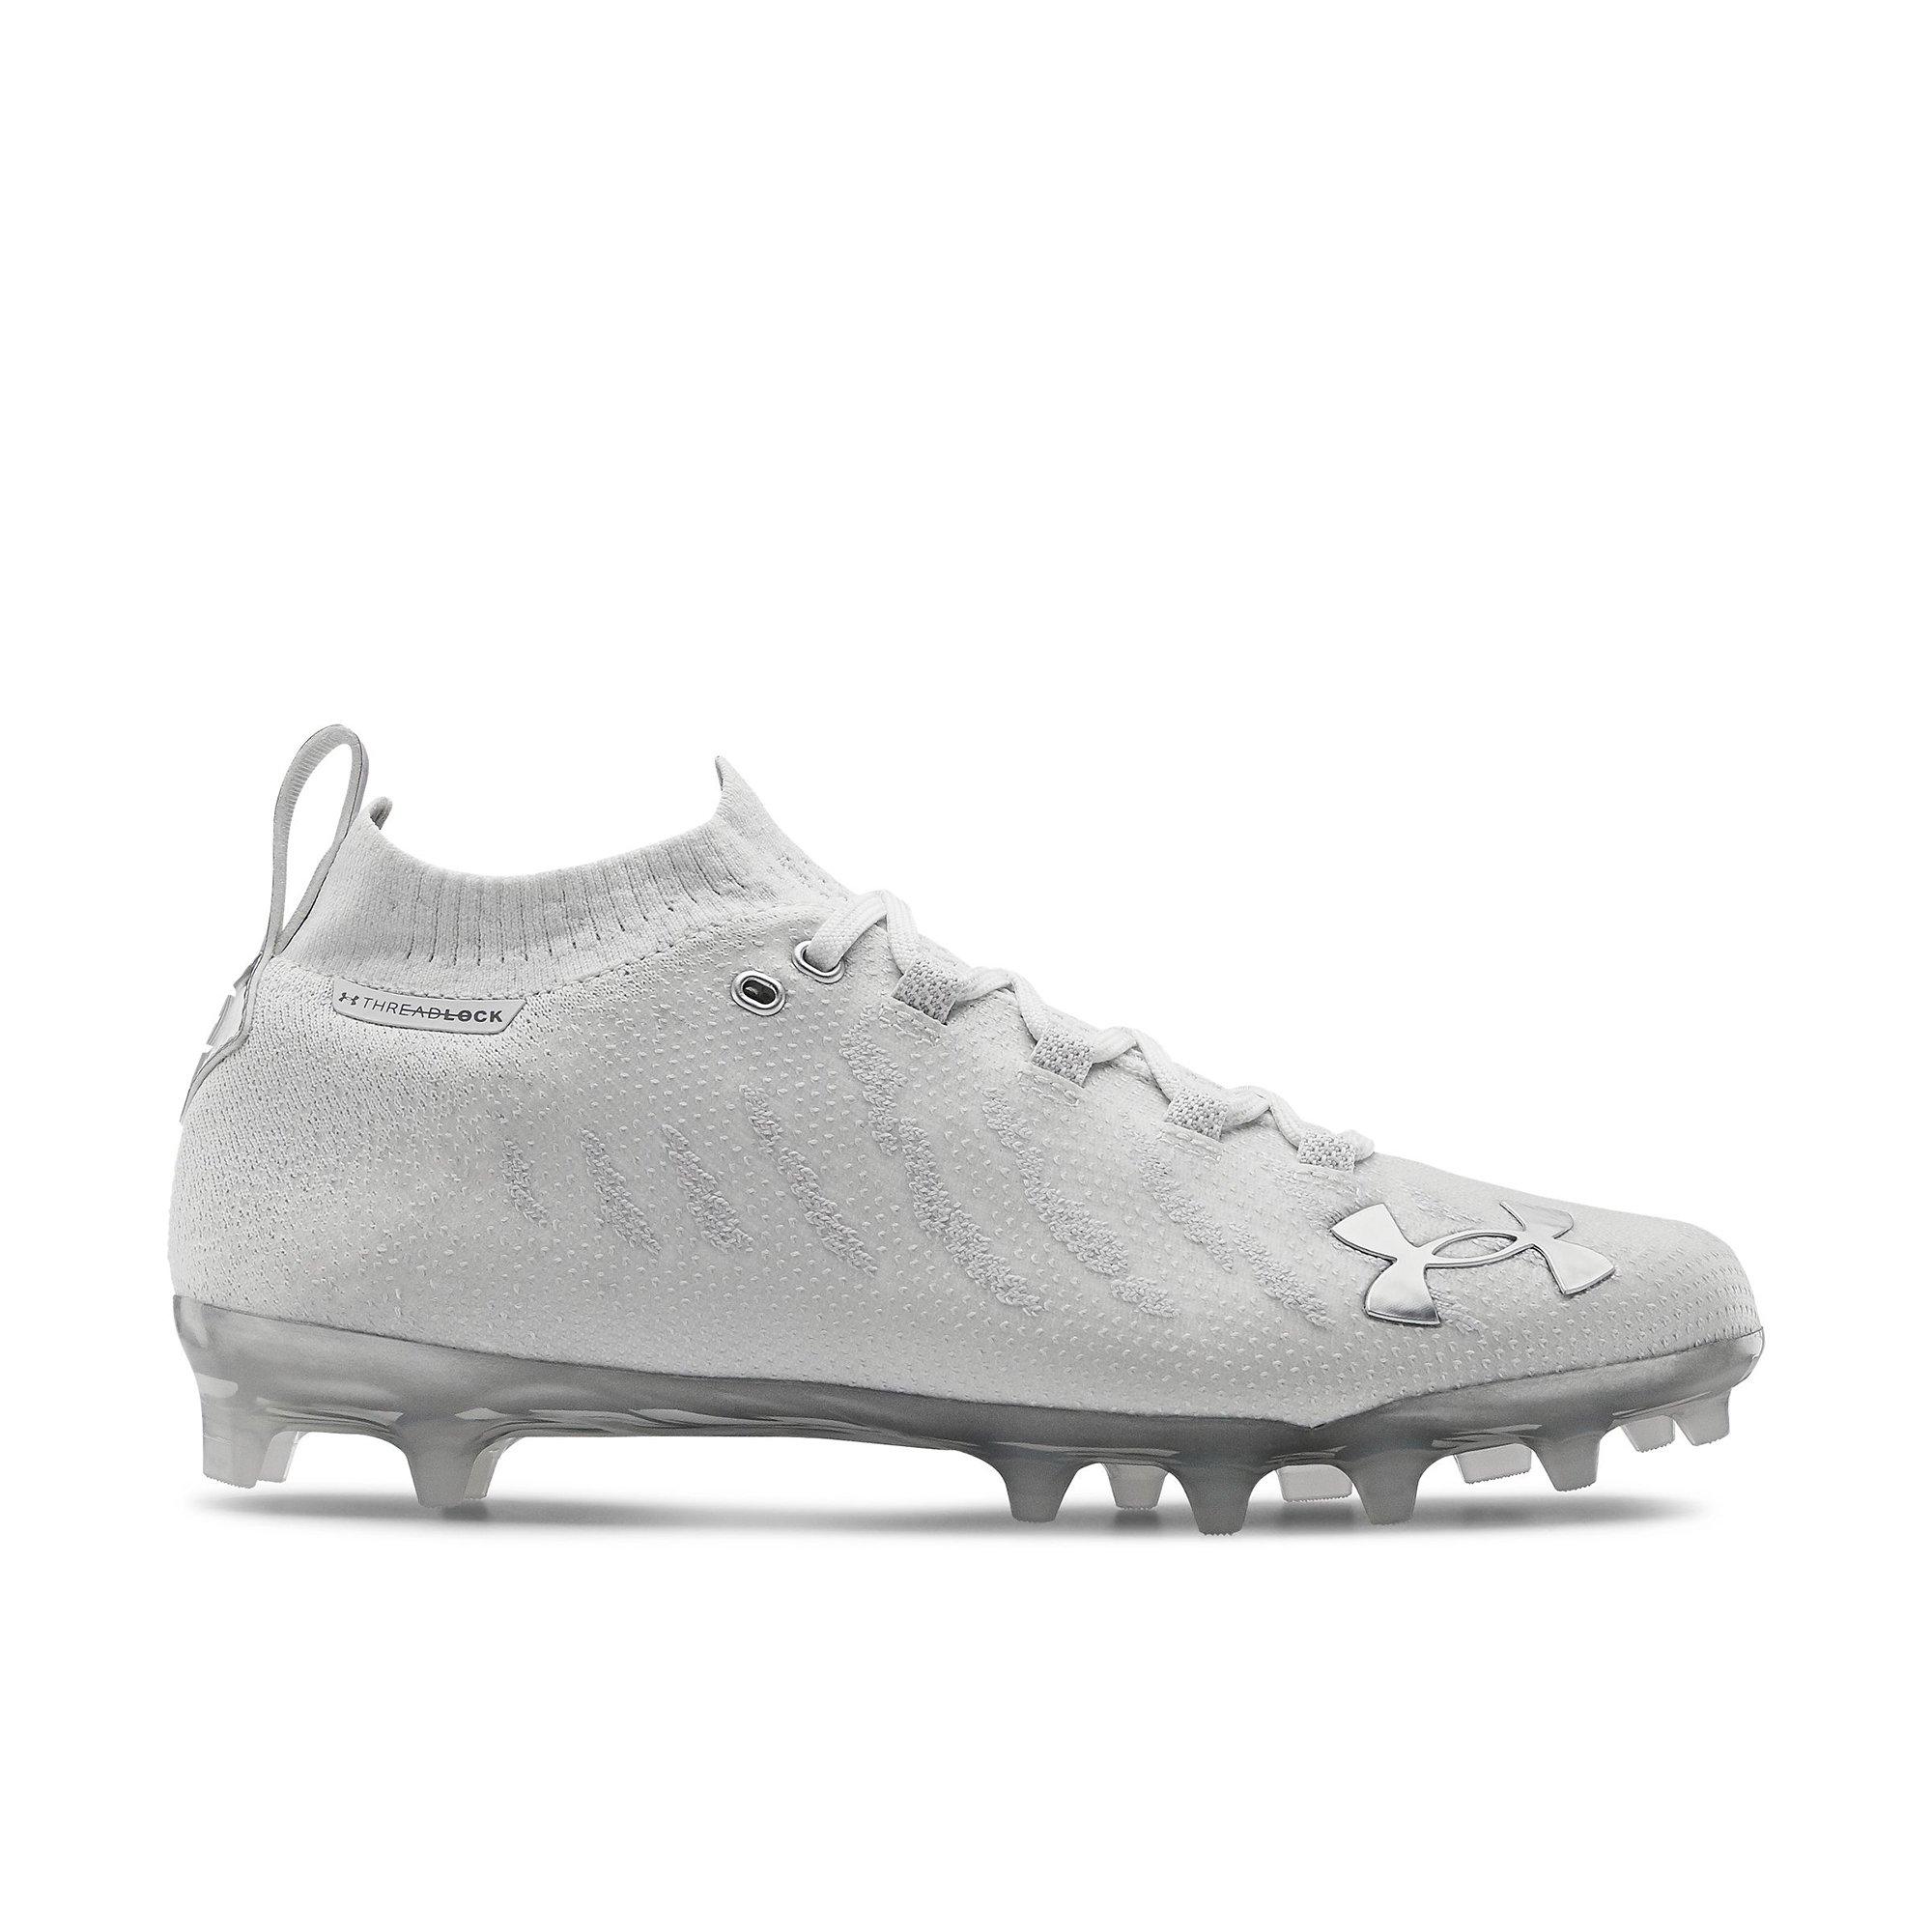 under armour wide receiver cleats